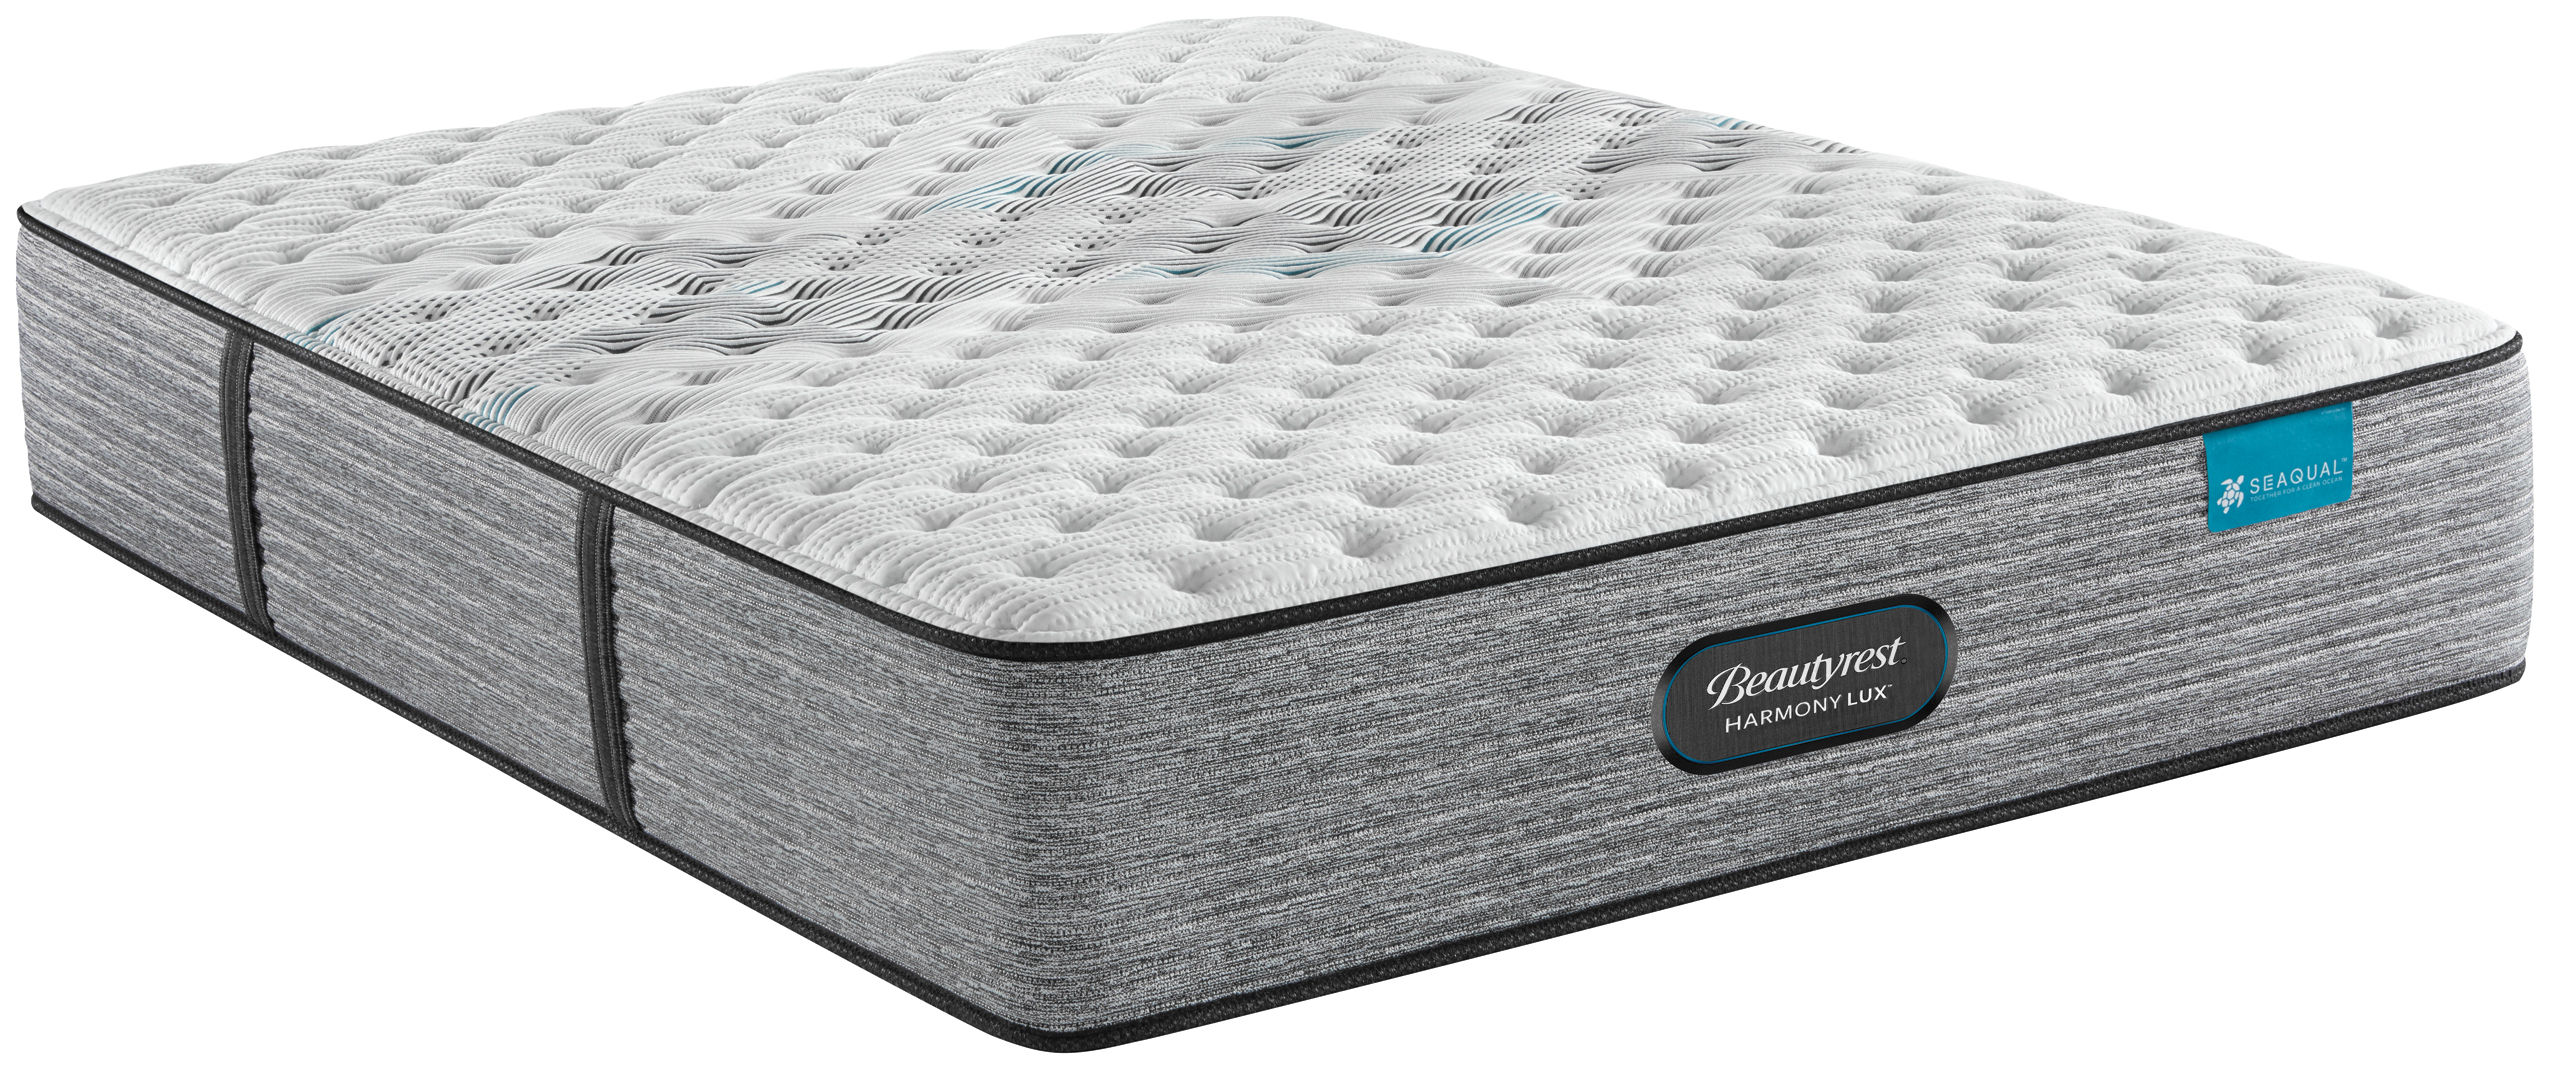 Beautyrest® Harmony Lux™ Carbon Series Pocketed Coil Extra Firm Twin XL Mattress